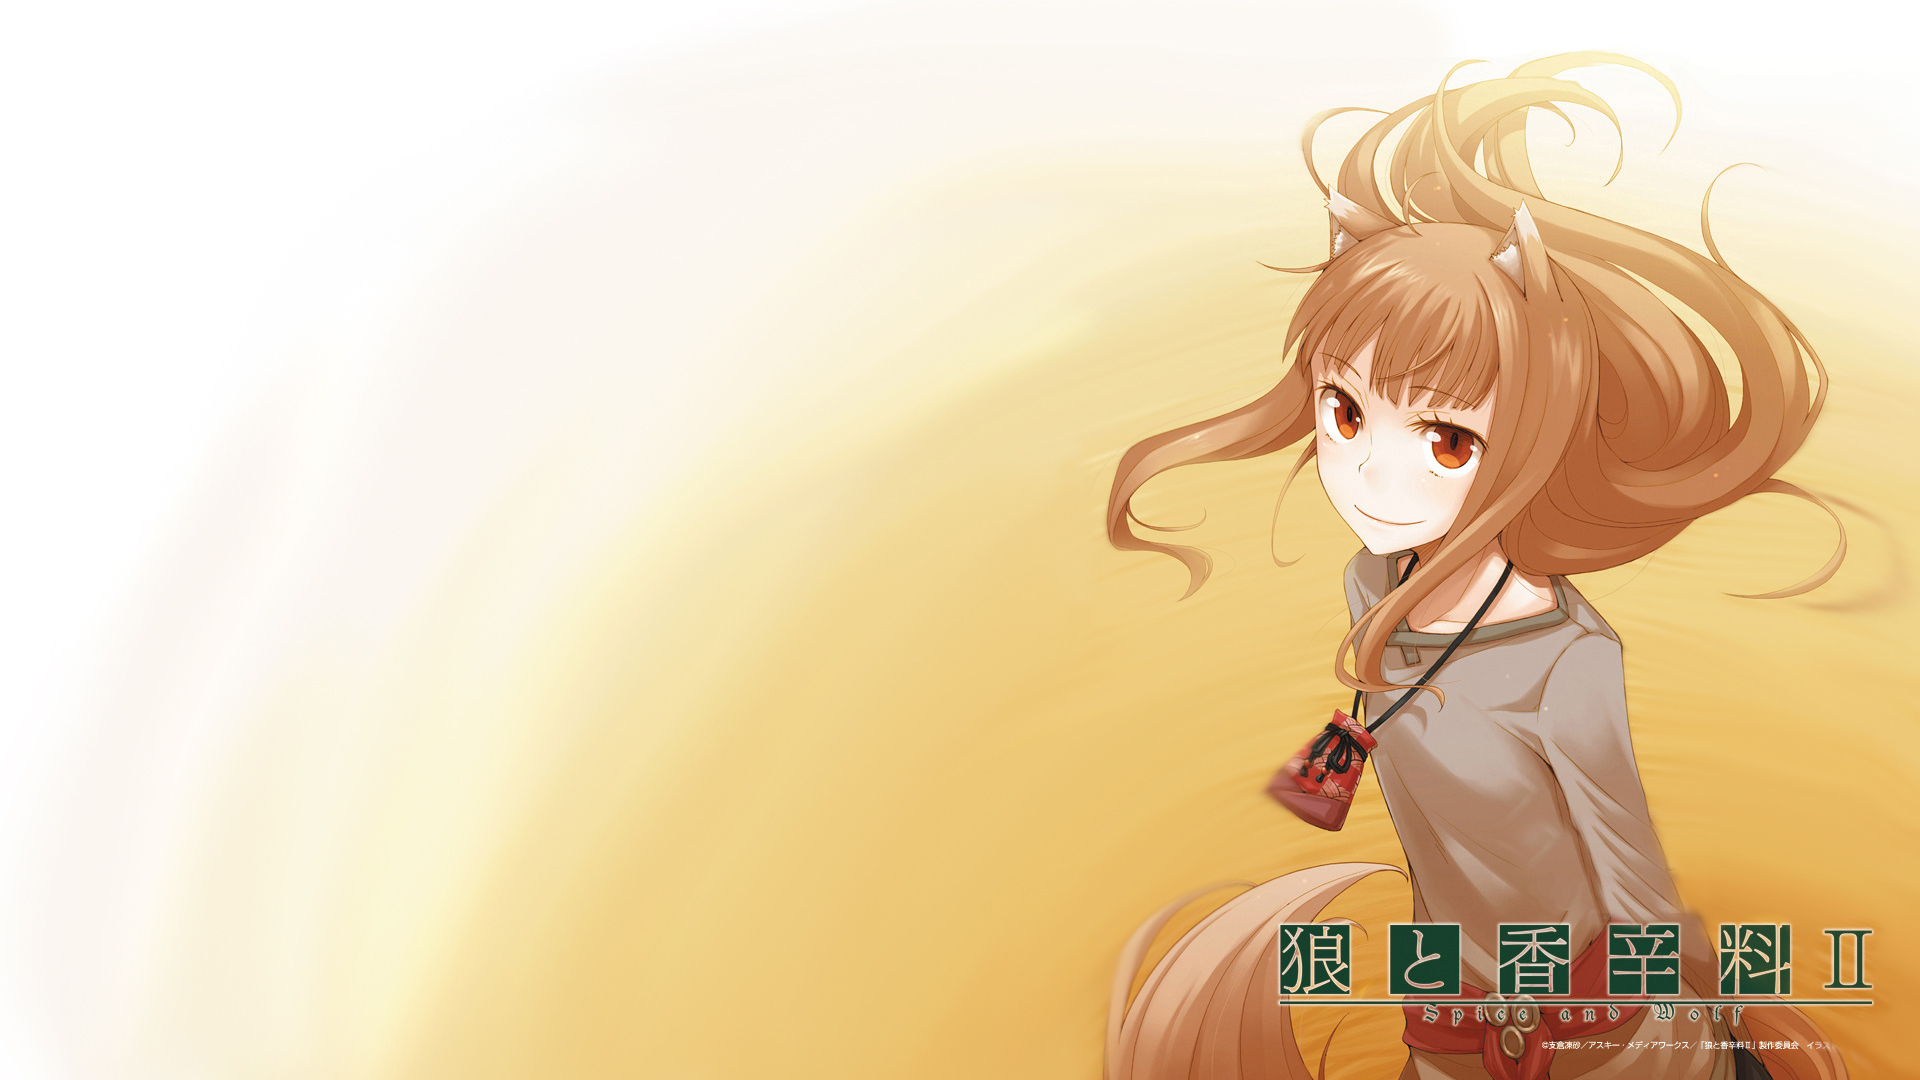 1920x1080 Spice and Wolf HD Wallpaper